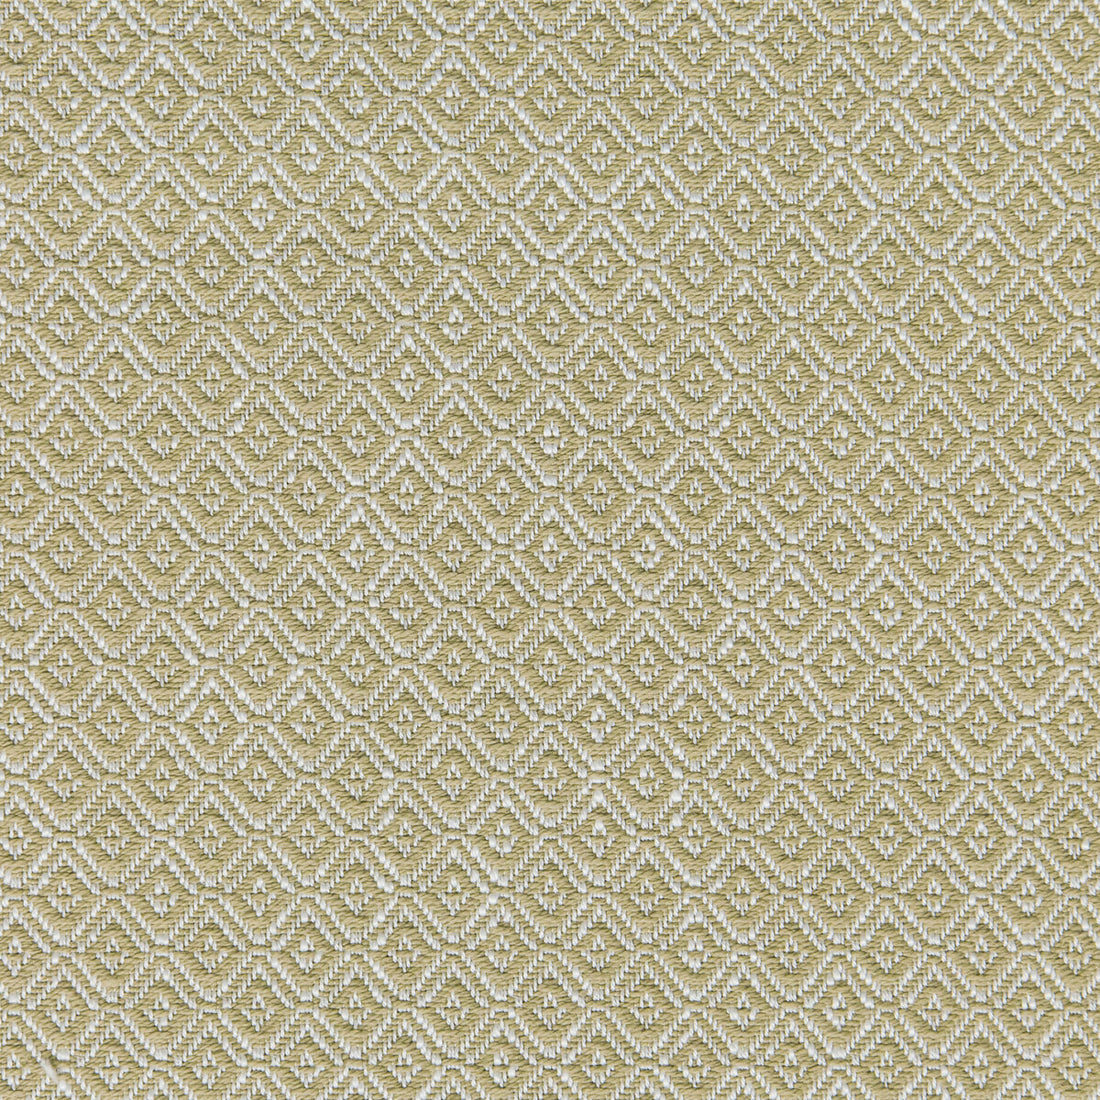 Seaford Weave fabric in sand color - pattern 2020106.106.0 - by Lee Jofa in the Linford Weaves collection